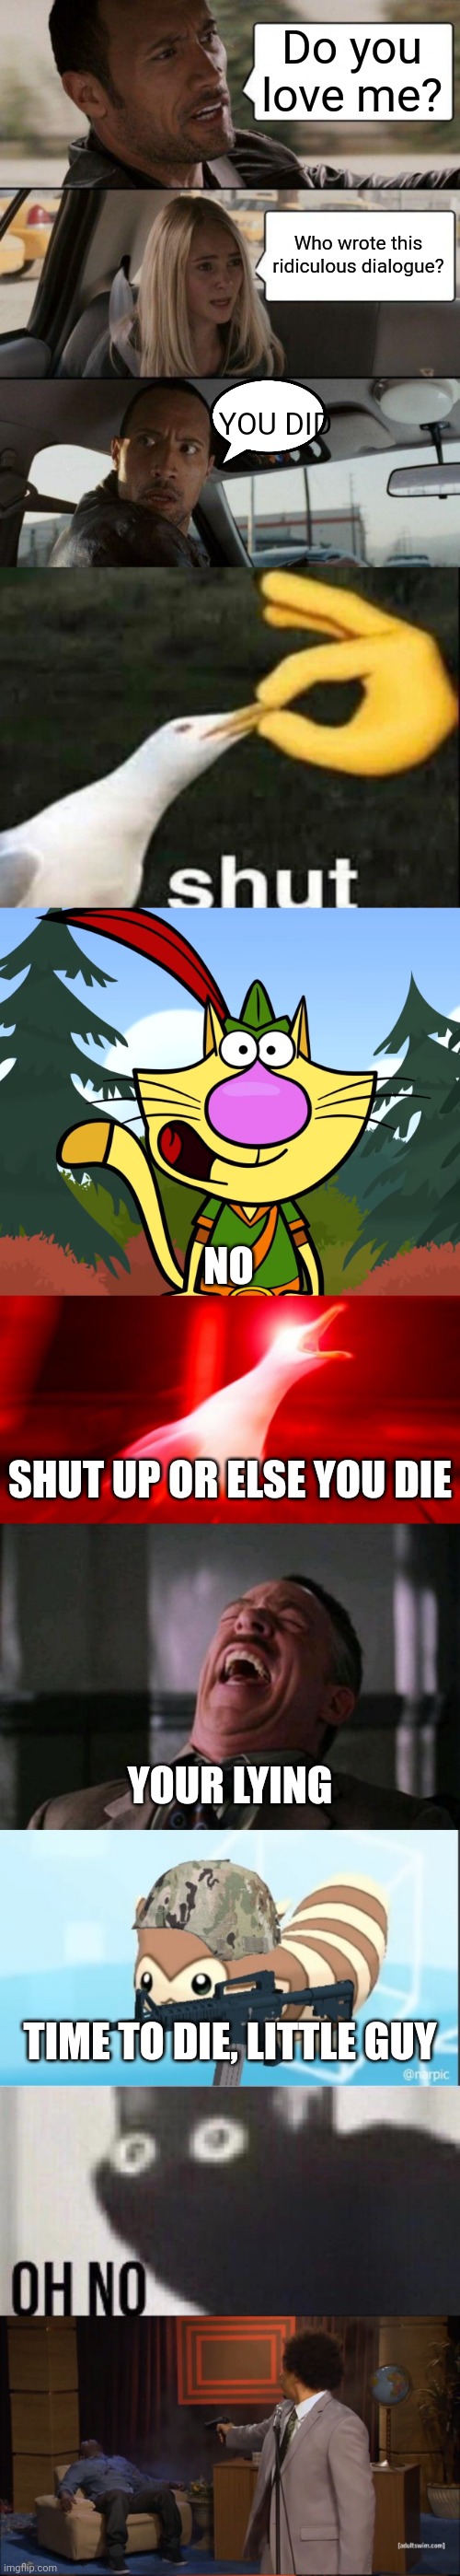 The ridiculously long meme | Do you love me? Who wrote this ridiculous dialogue? YOU DID; NO; SHUT UP OR ELSE YOU DIE; YOUR LYING; TIME TO DIE, LITTLE GUY | image tagged in memes,the rock driving,shut,no way nature cat,inhalin seagull,ha ha ha ha | made w/ Imgflip meme maker